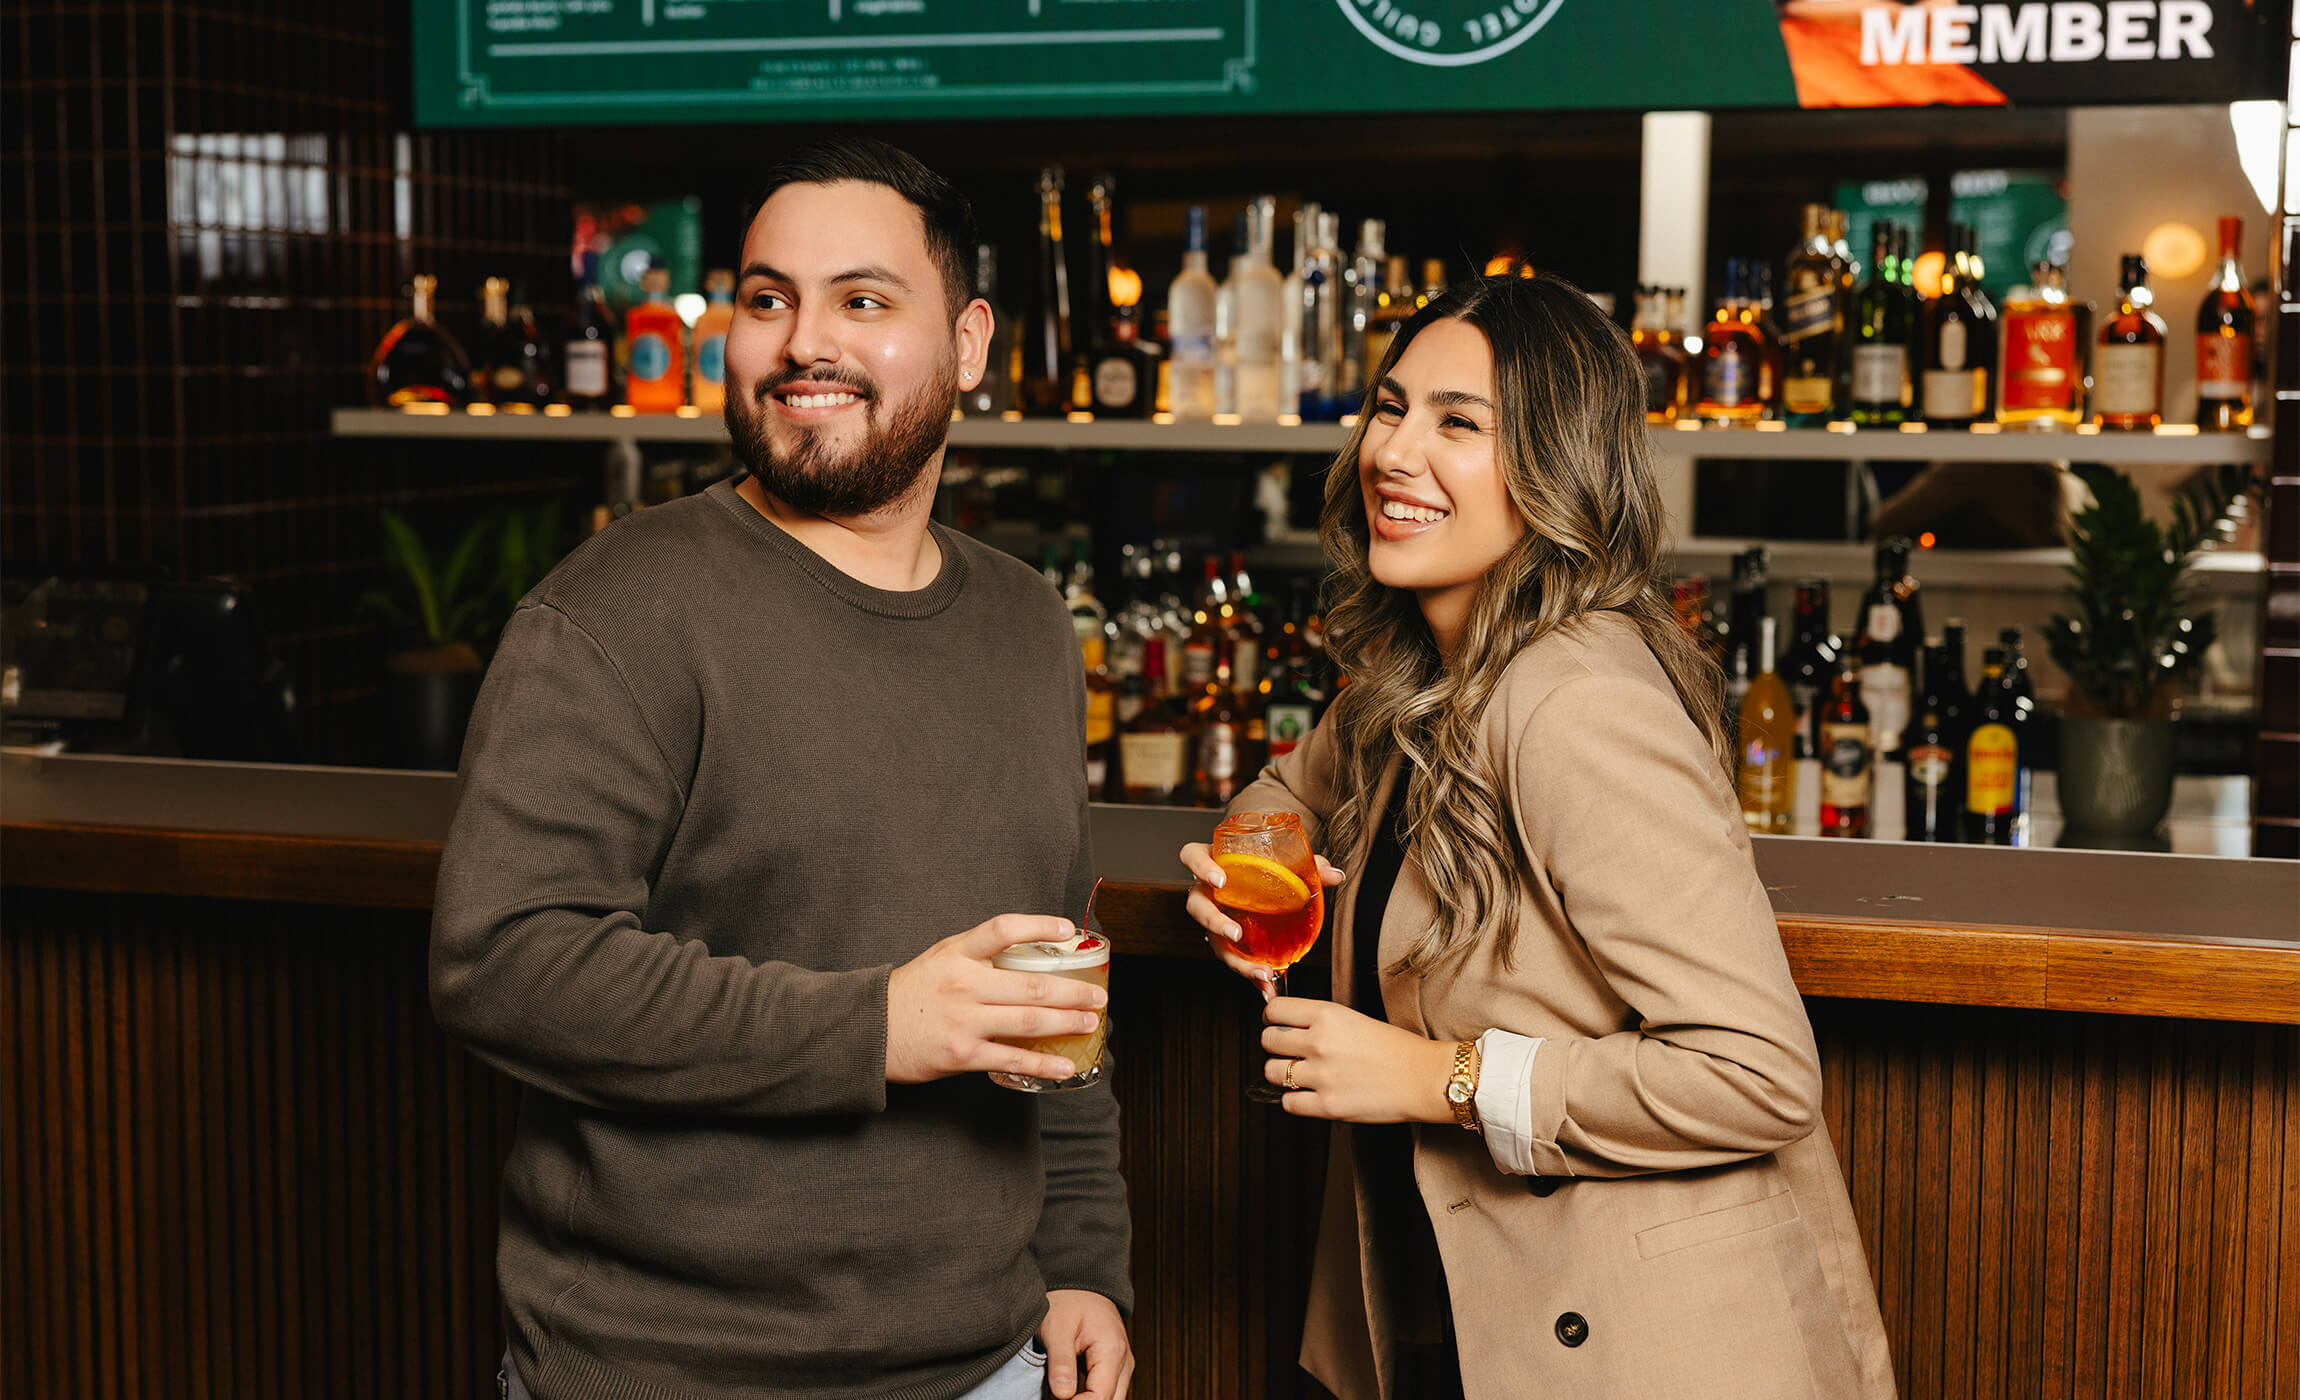 A happy couple standing in front of a bar, enjoying each other's company.